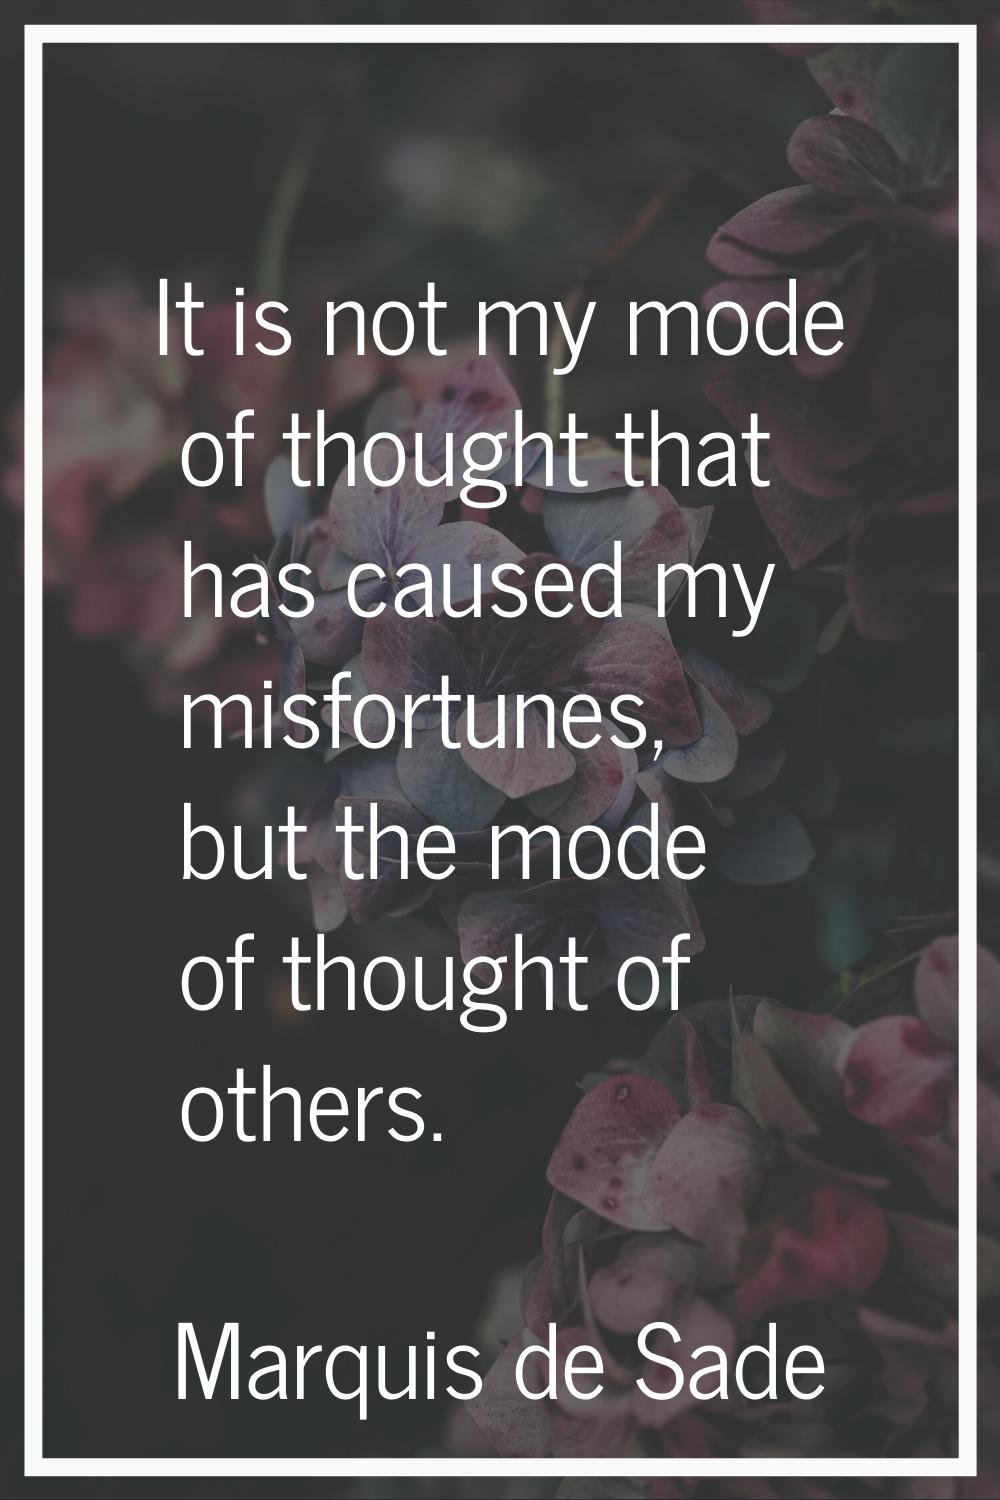 It is not my mode of thought that has caused my misfortunes, but the mode of thought of others.